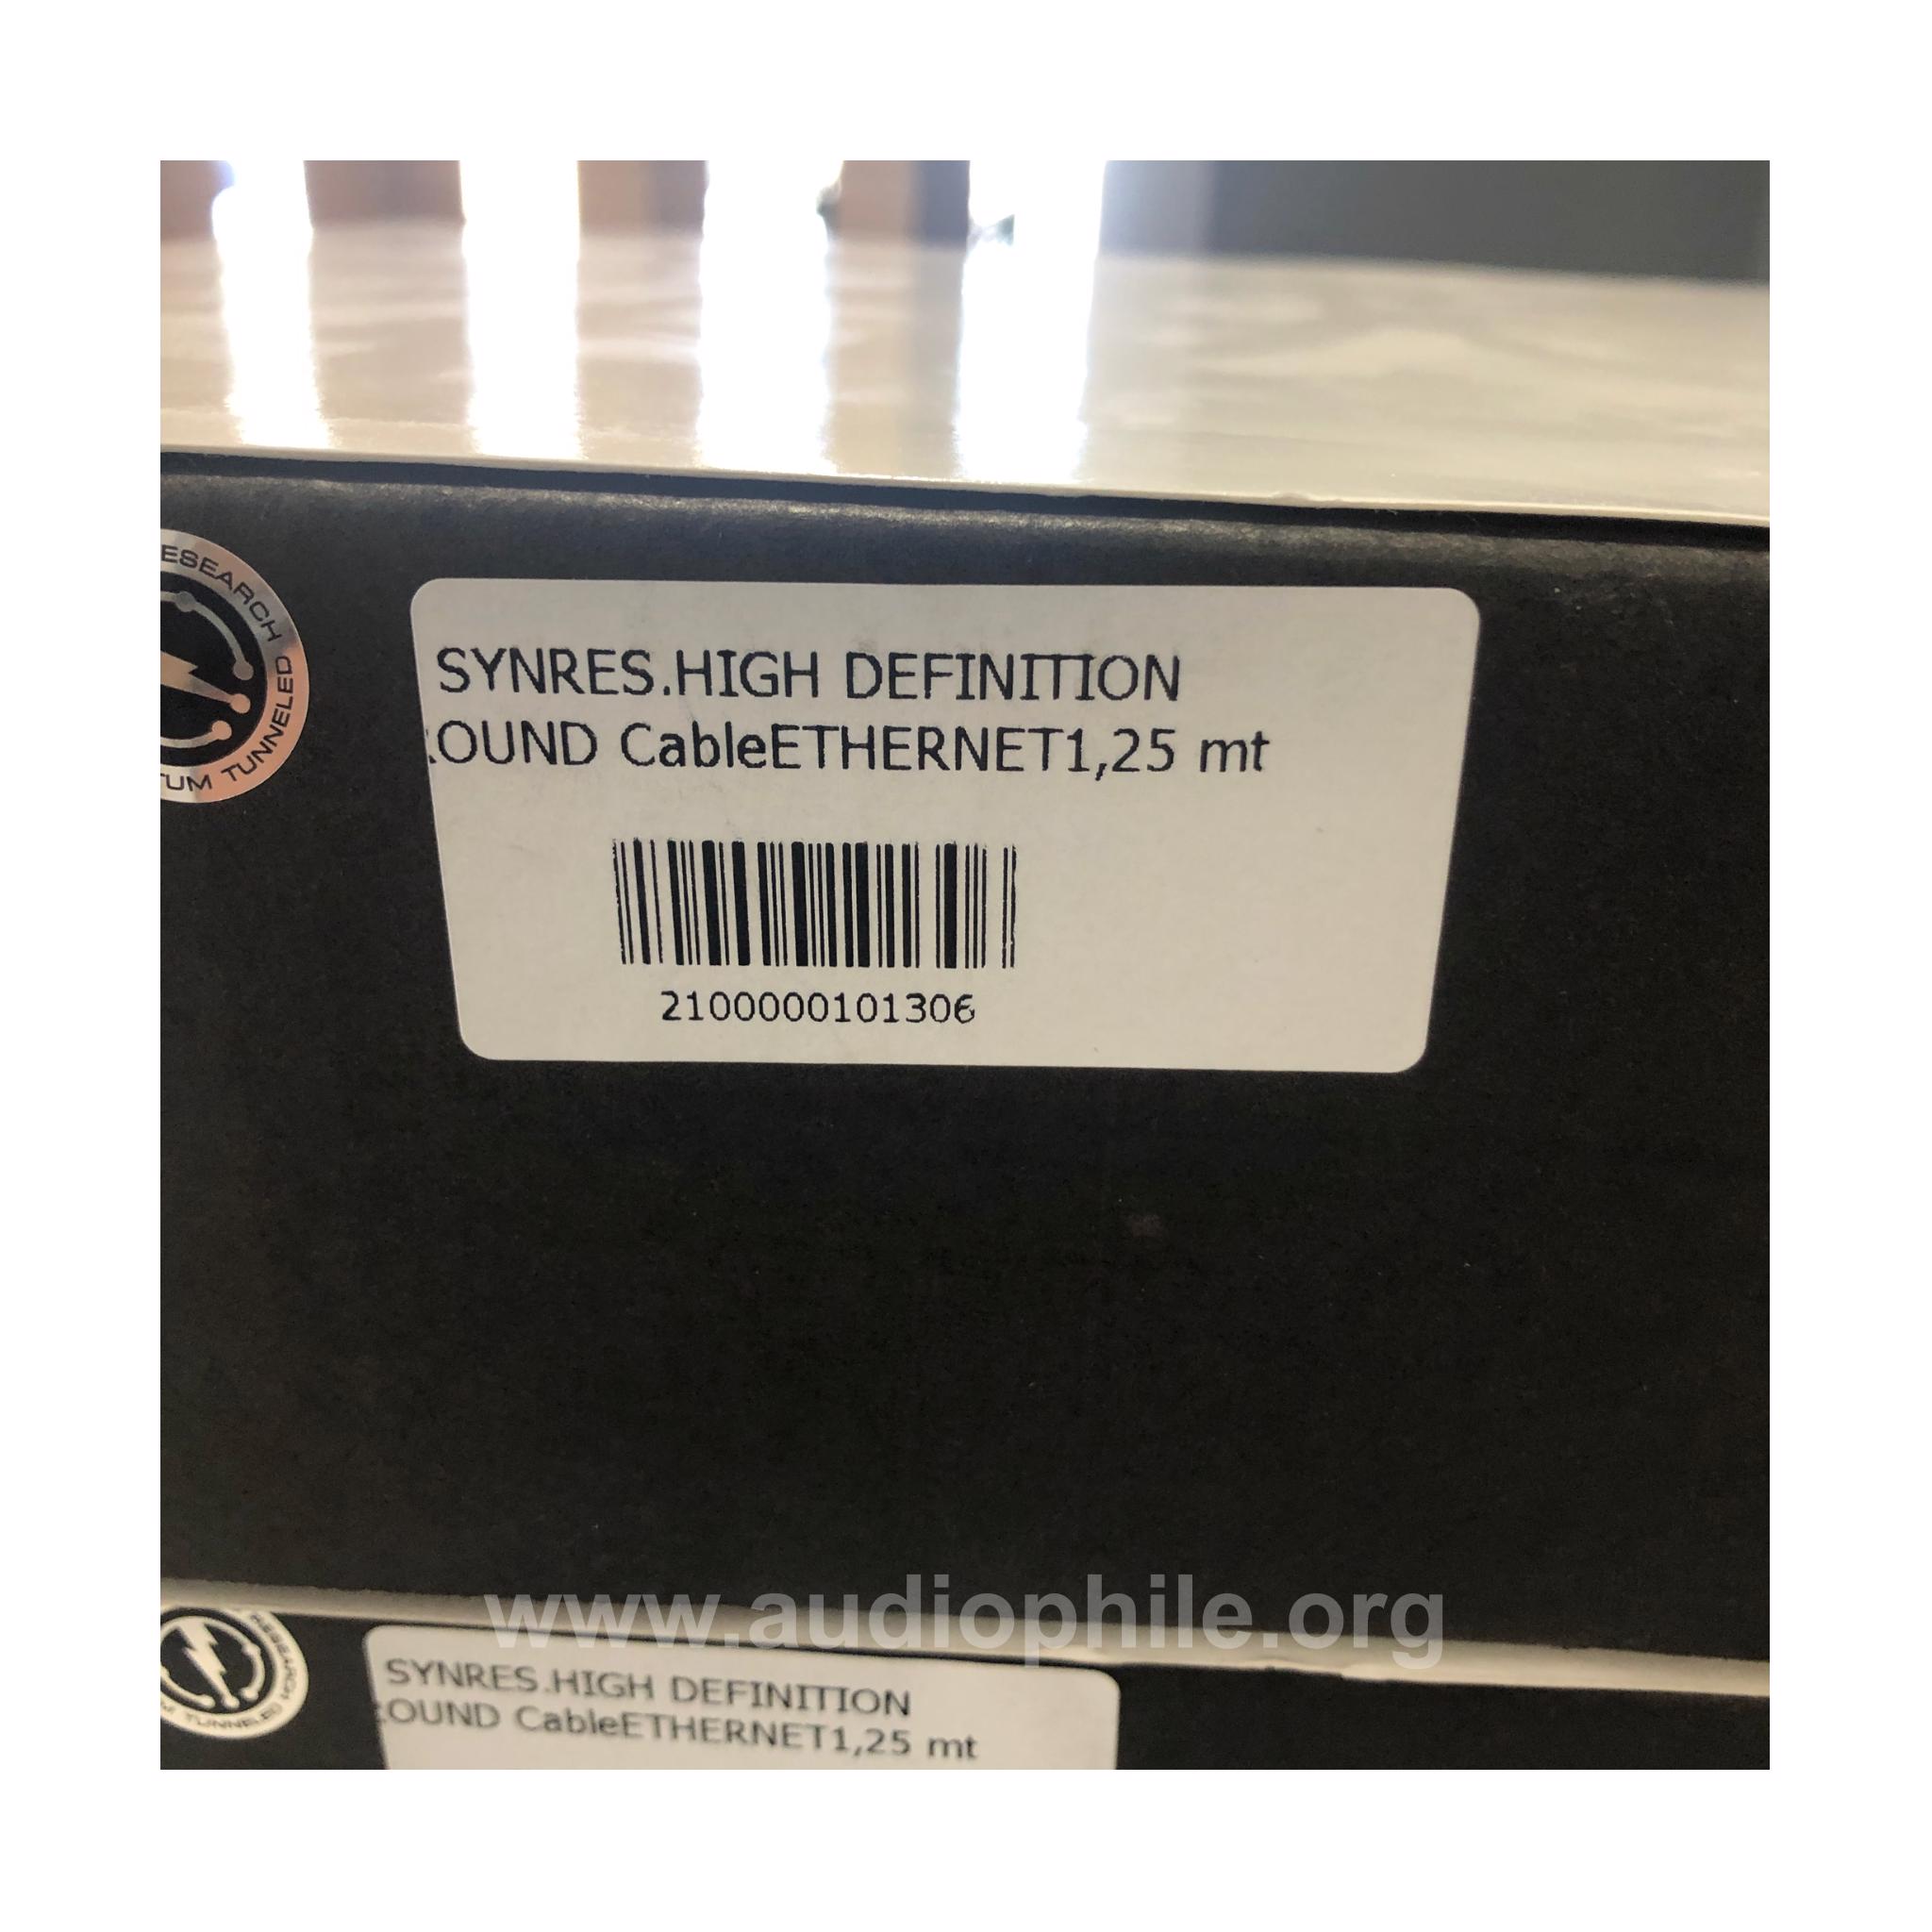 Synergistic research high definition ground cable ethernet 1.25 mt